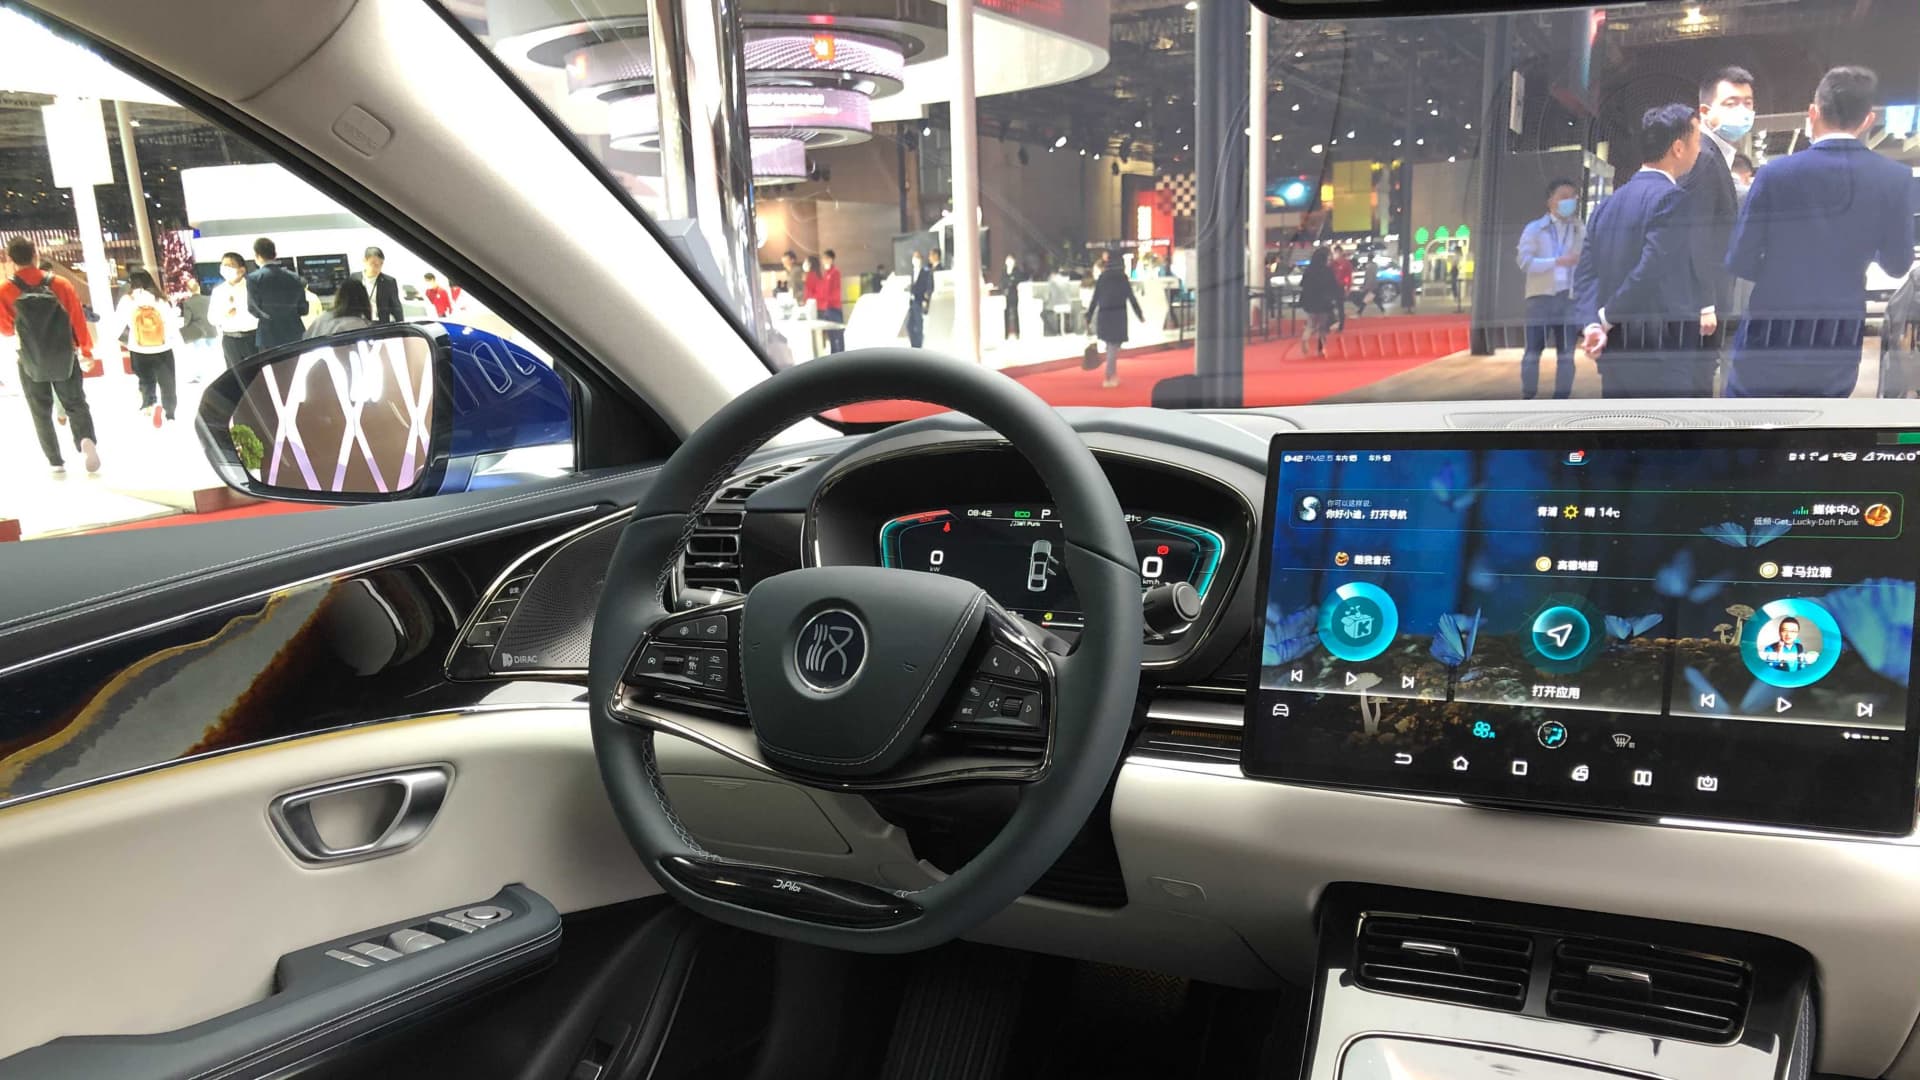 Buyers of BYD's luxury Han electric car can customize the interior, as shown in this model displayed at the auto show in Shanghai in April 2021.